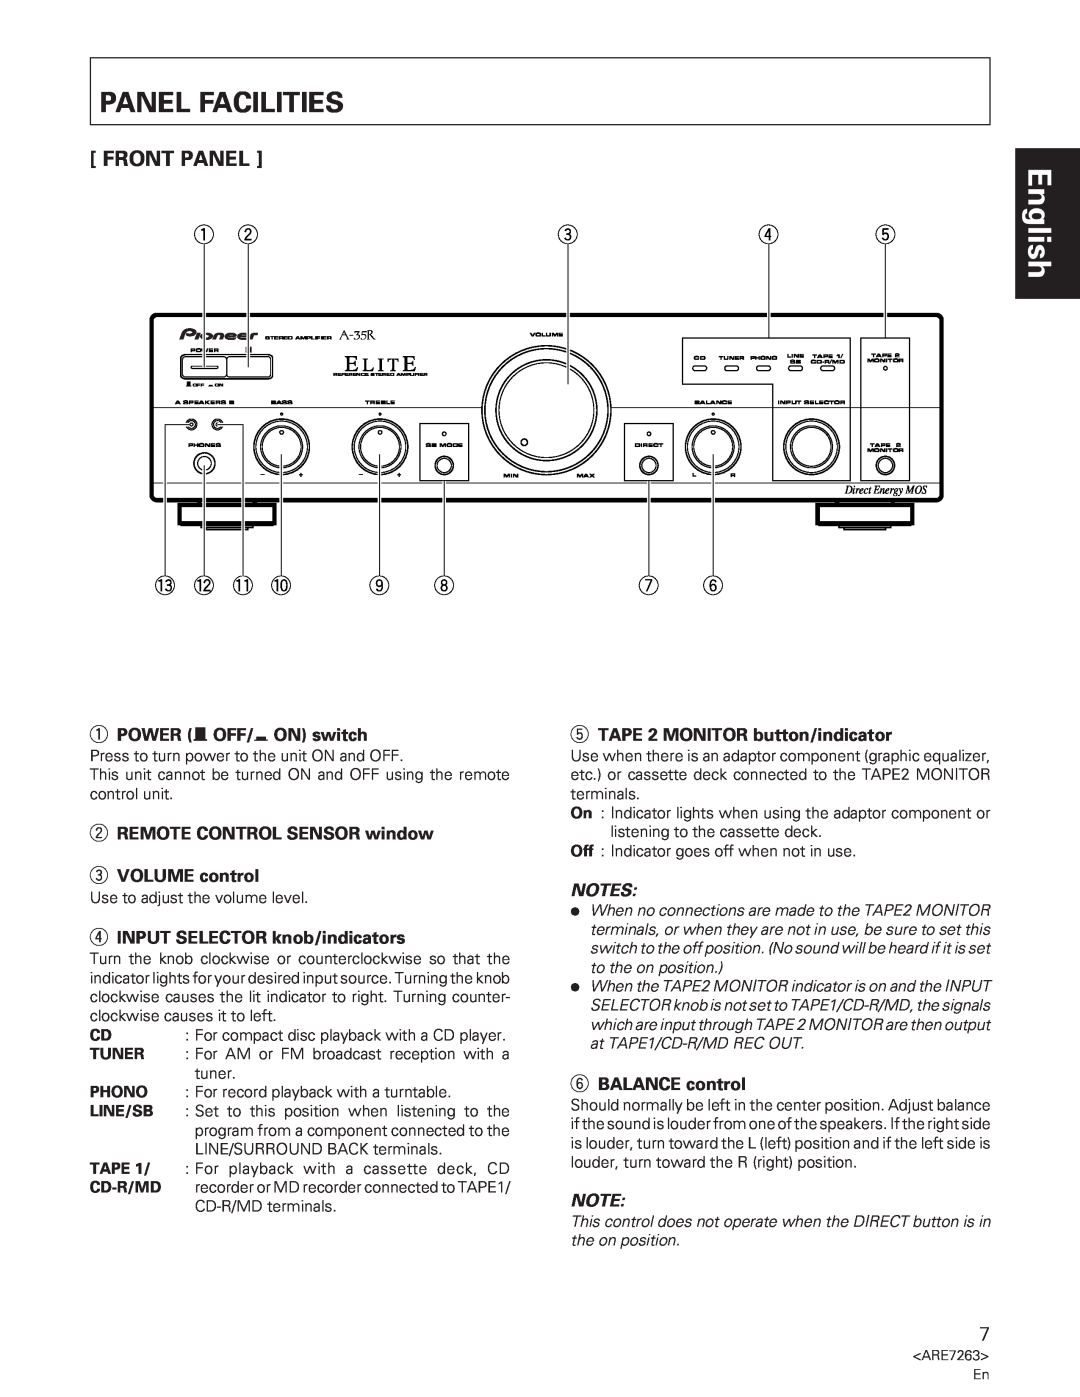 Pioneer A-35R Panel Facilities, Front Panel, ~ =, 1POWER Ñ OFF/_ ON switch, 2REMOTE CONTROL SENSOR window 3VOLUME control 